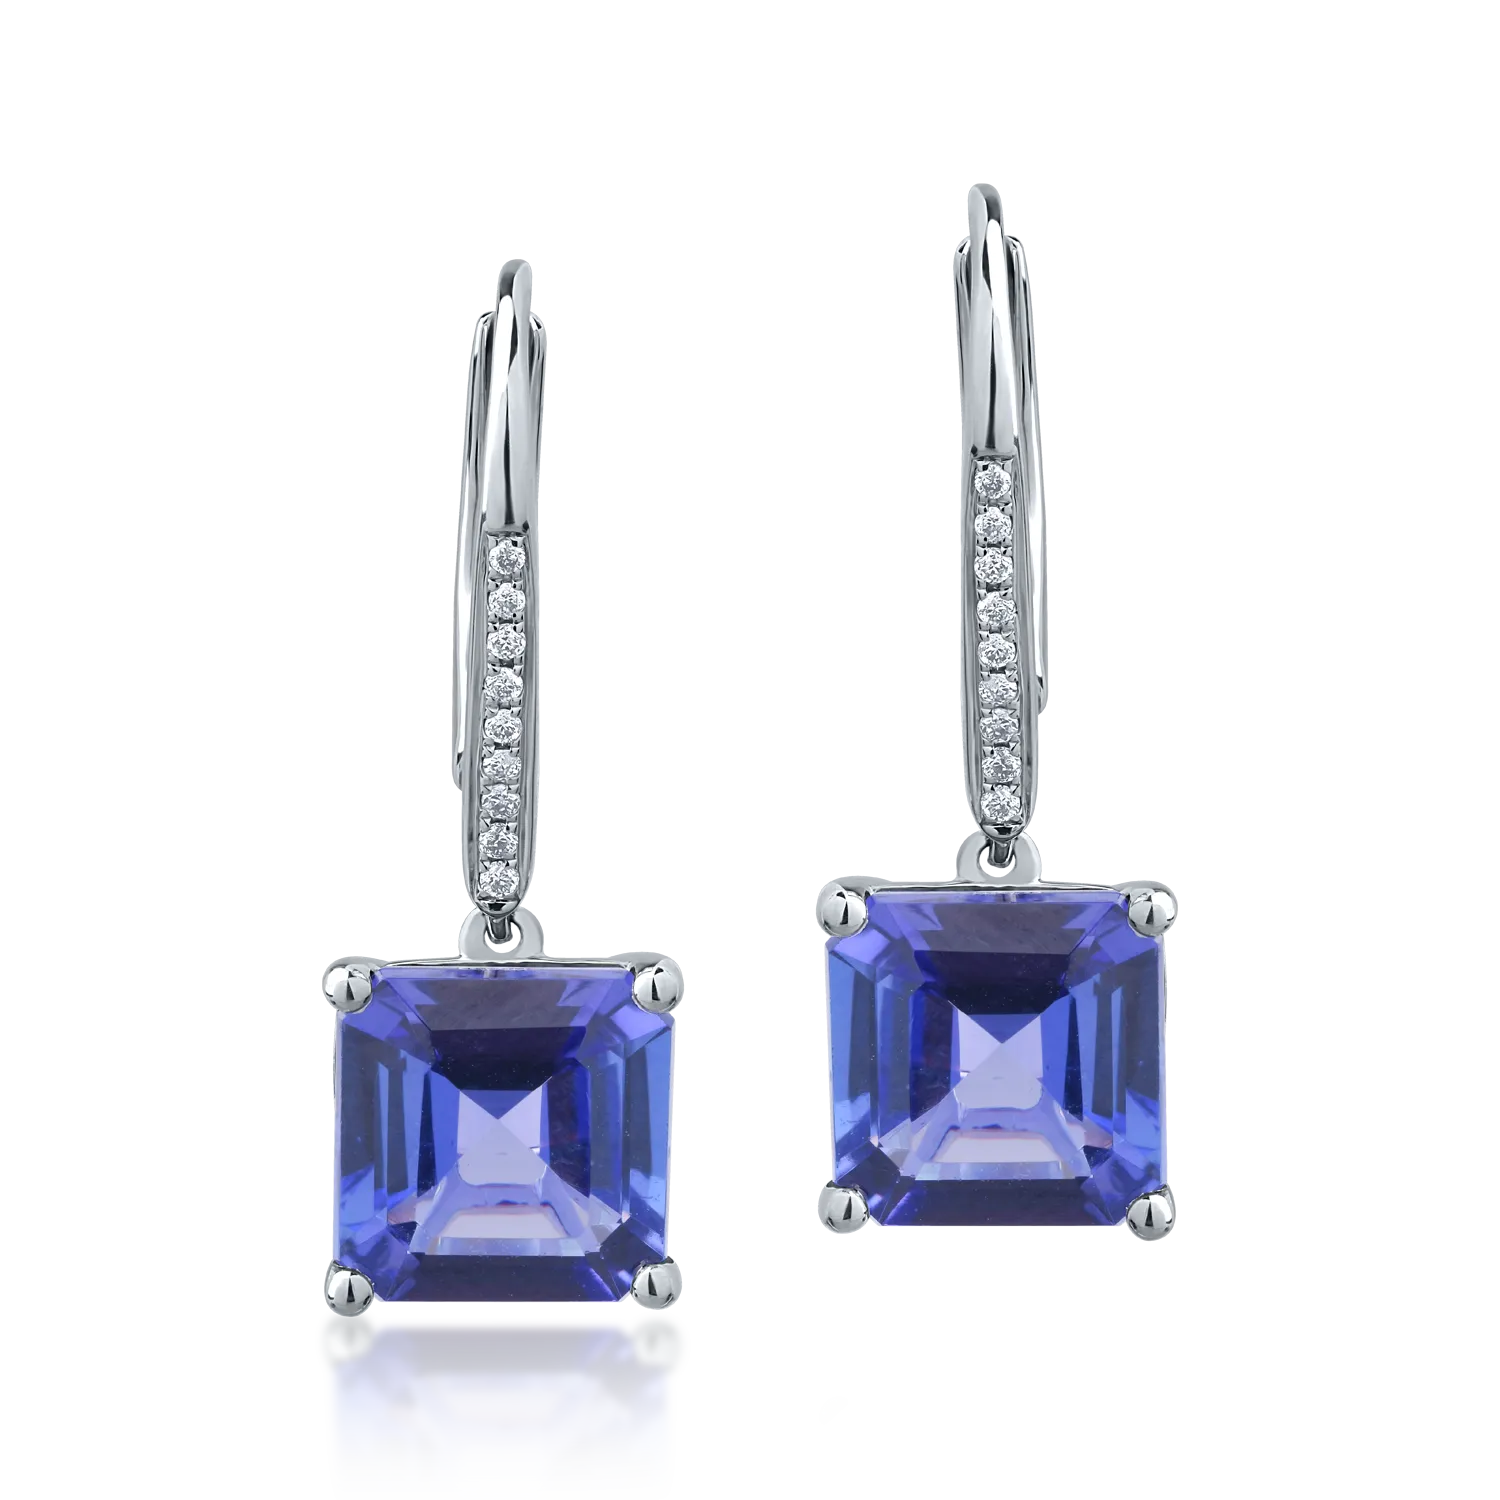 18K white gold earrings with 5.87ct tanzanites and 0.07ct diamonds